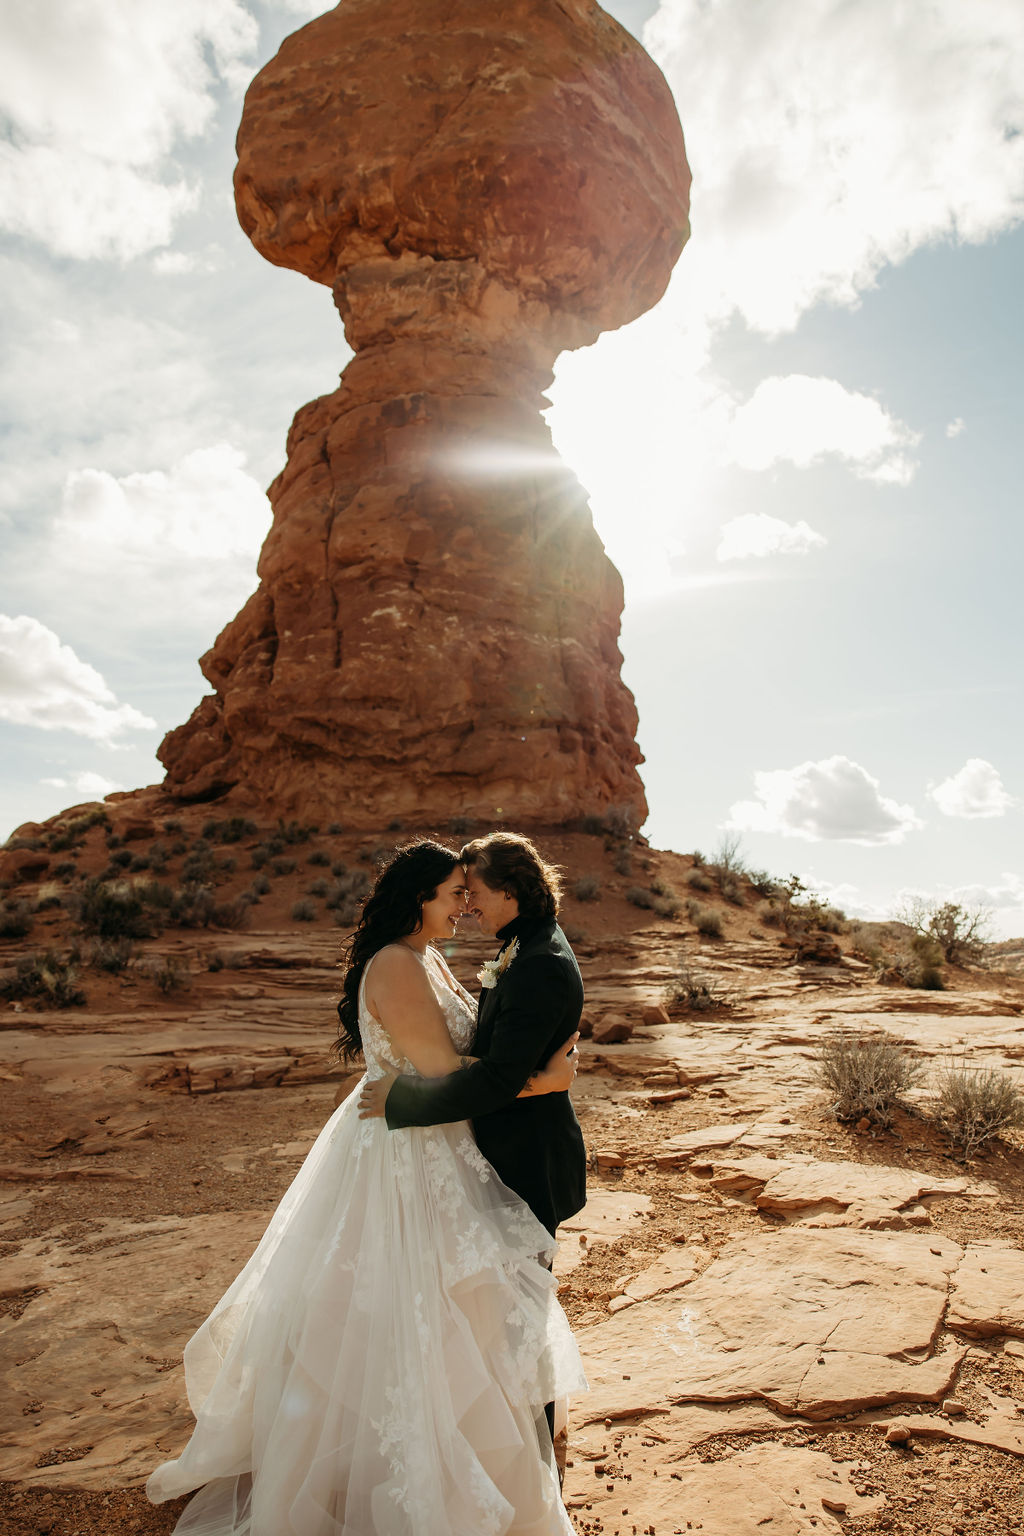 A couple in wedding attire embracing in front of the balanced rock formation. 